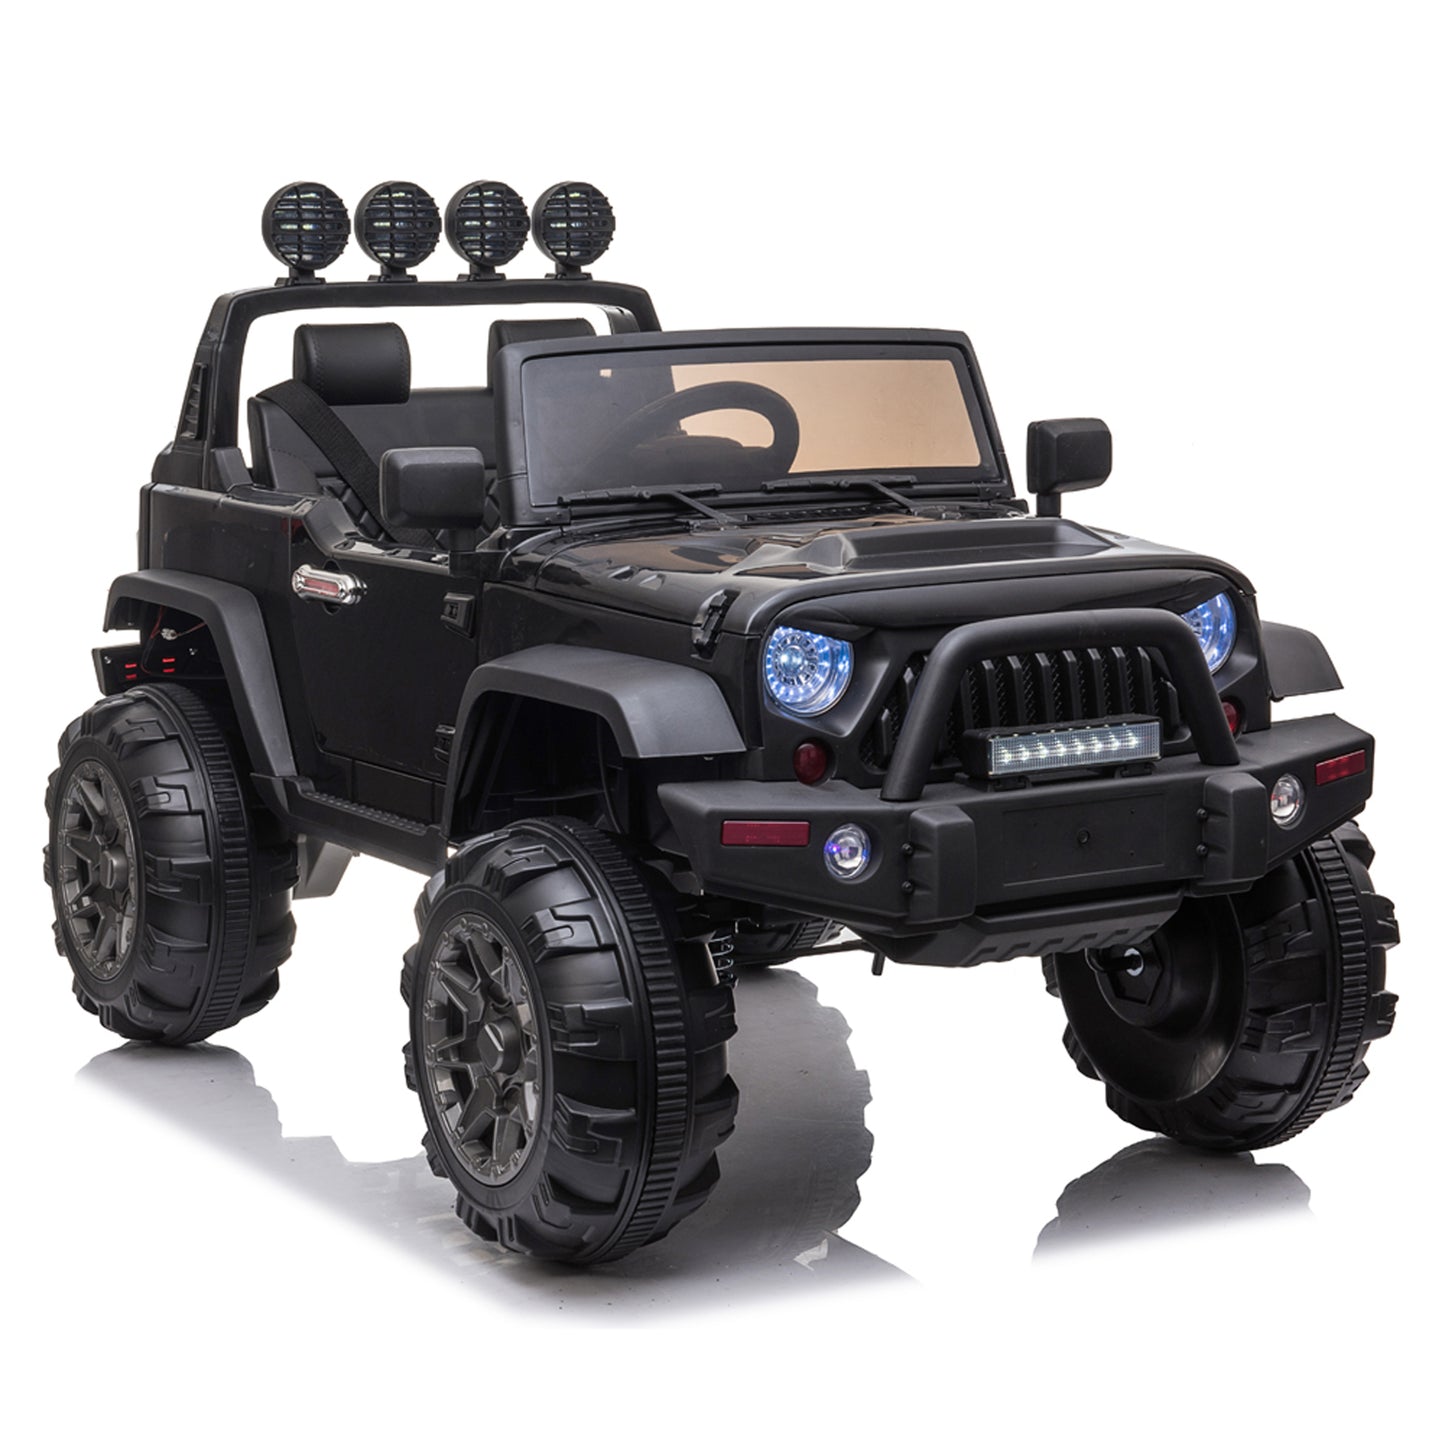 Battery Powered Car with 3 Speed for Kids, 12V Unisex Ride on Truck w/ Remote Control, MP3 Player, LED Headlights & Spring Suspension, Battery Operated Electric Toy Vehicle Gift for Party, C08